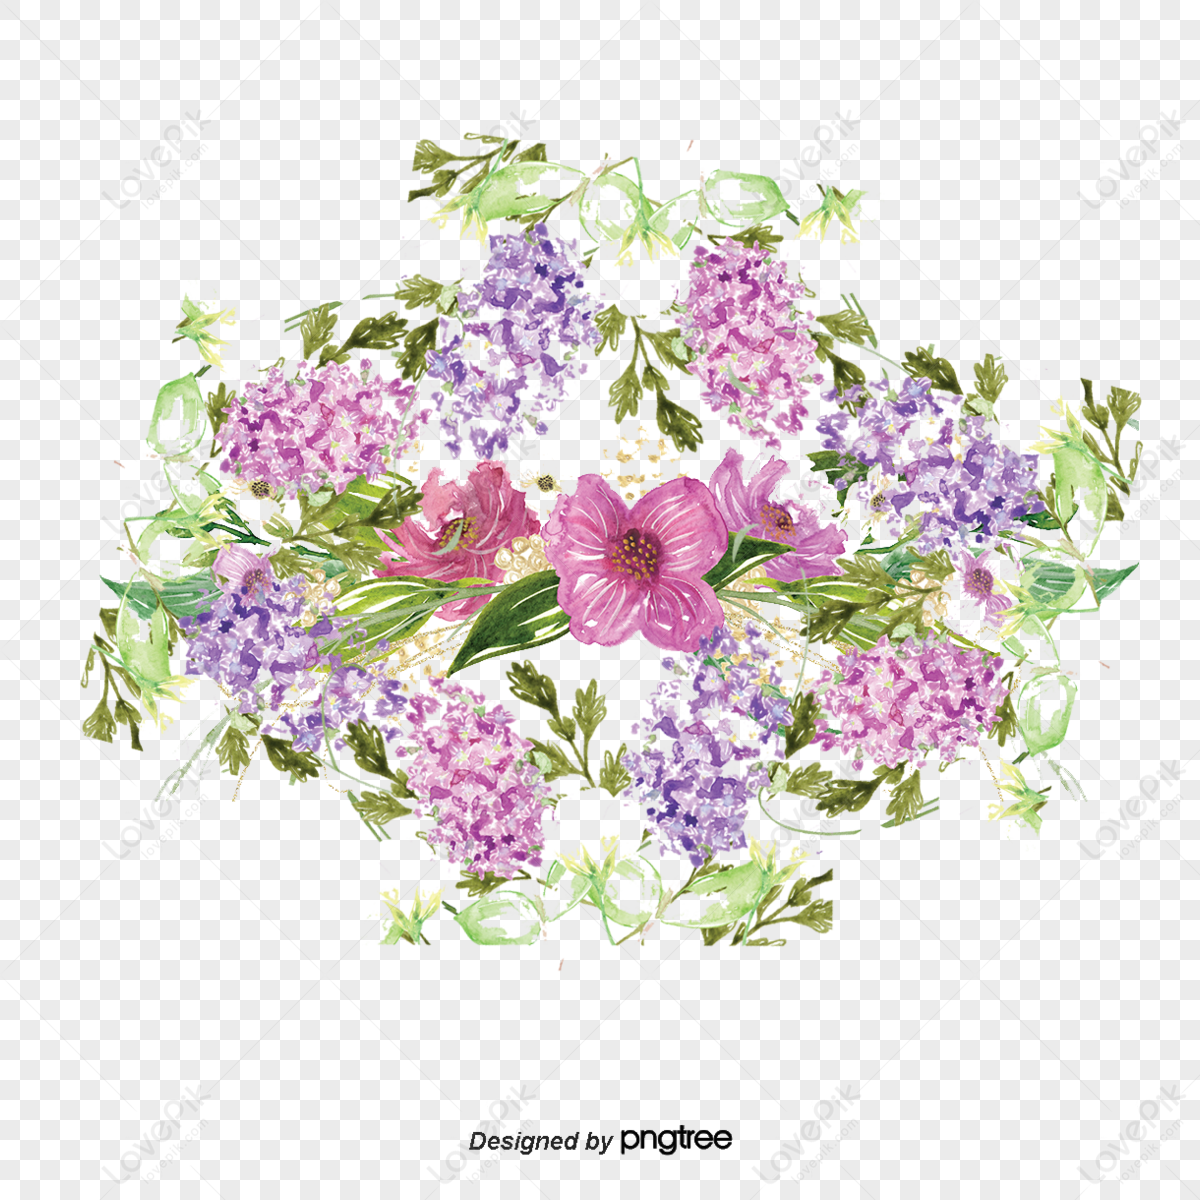 Flower Album PNG Images With Transparent Background